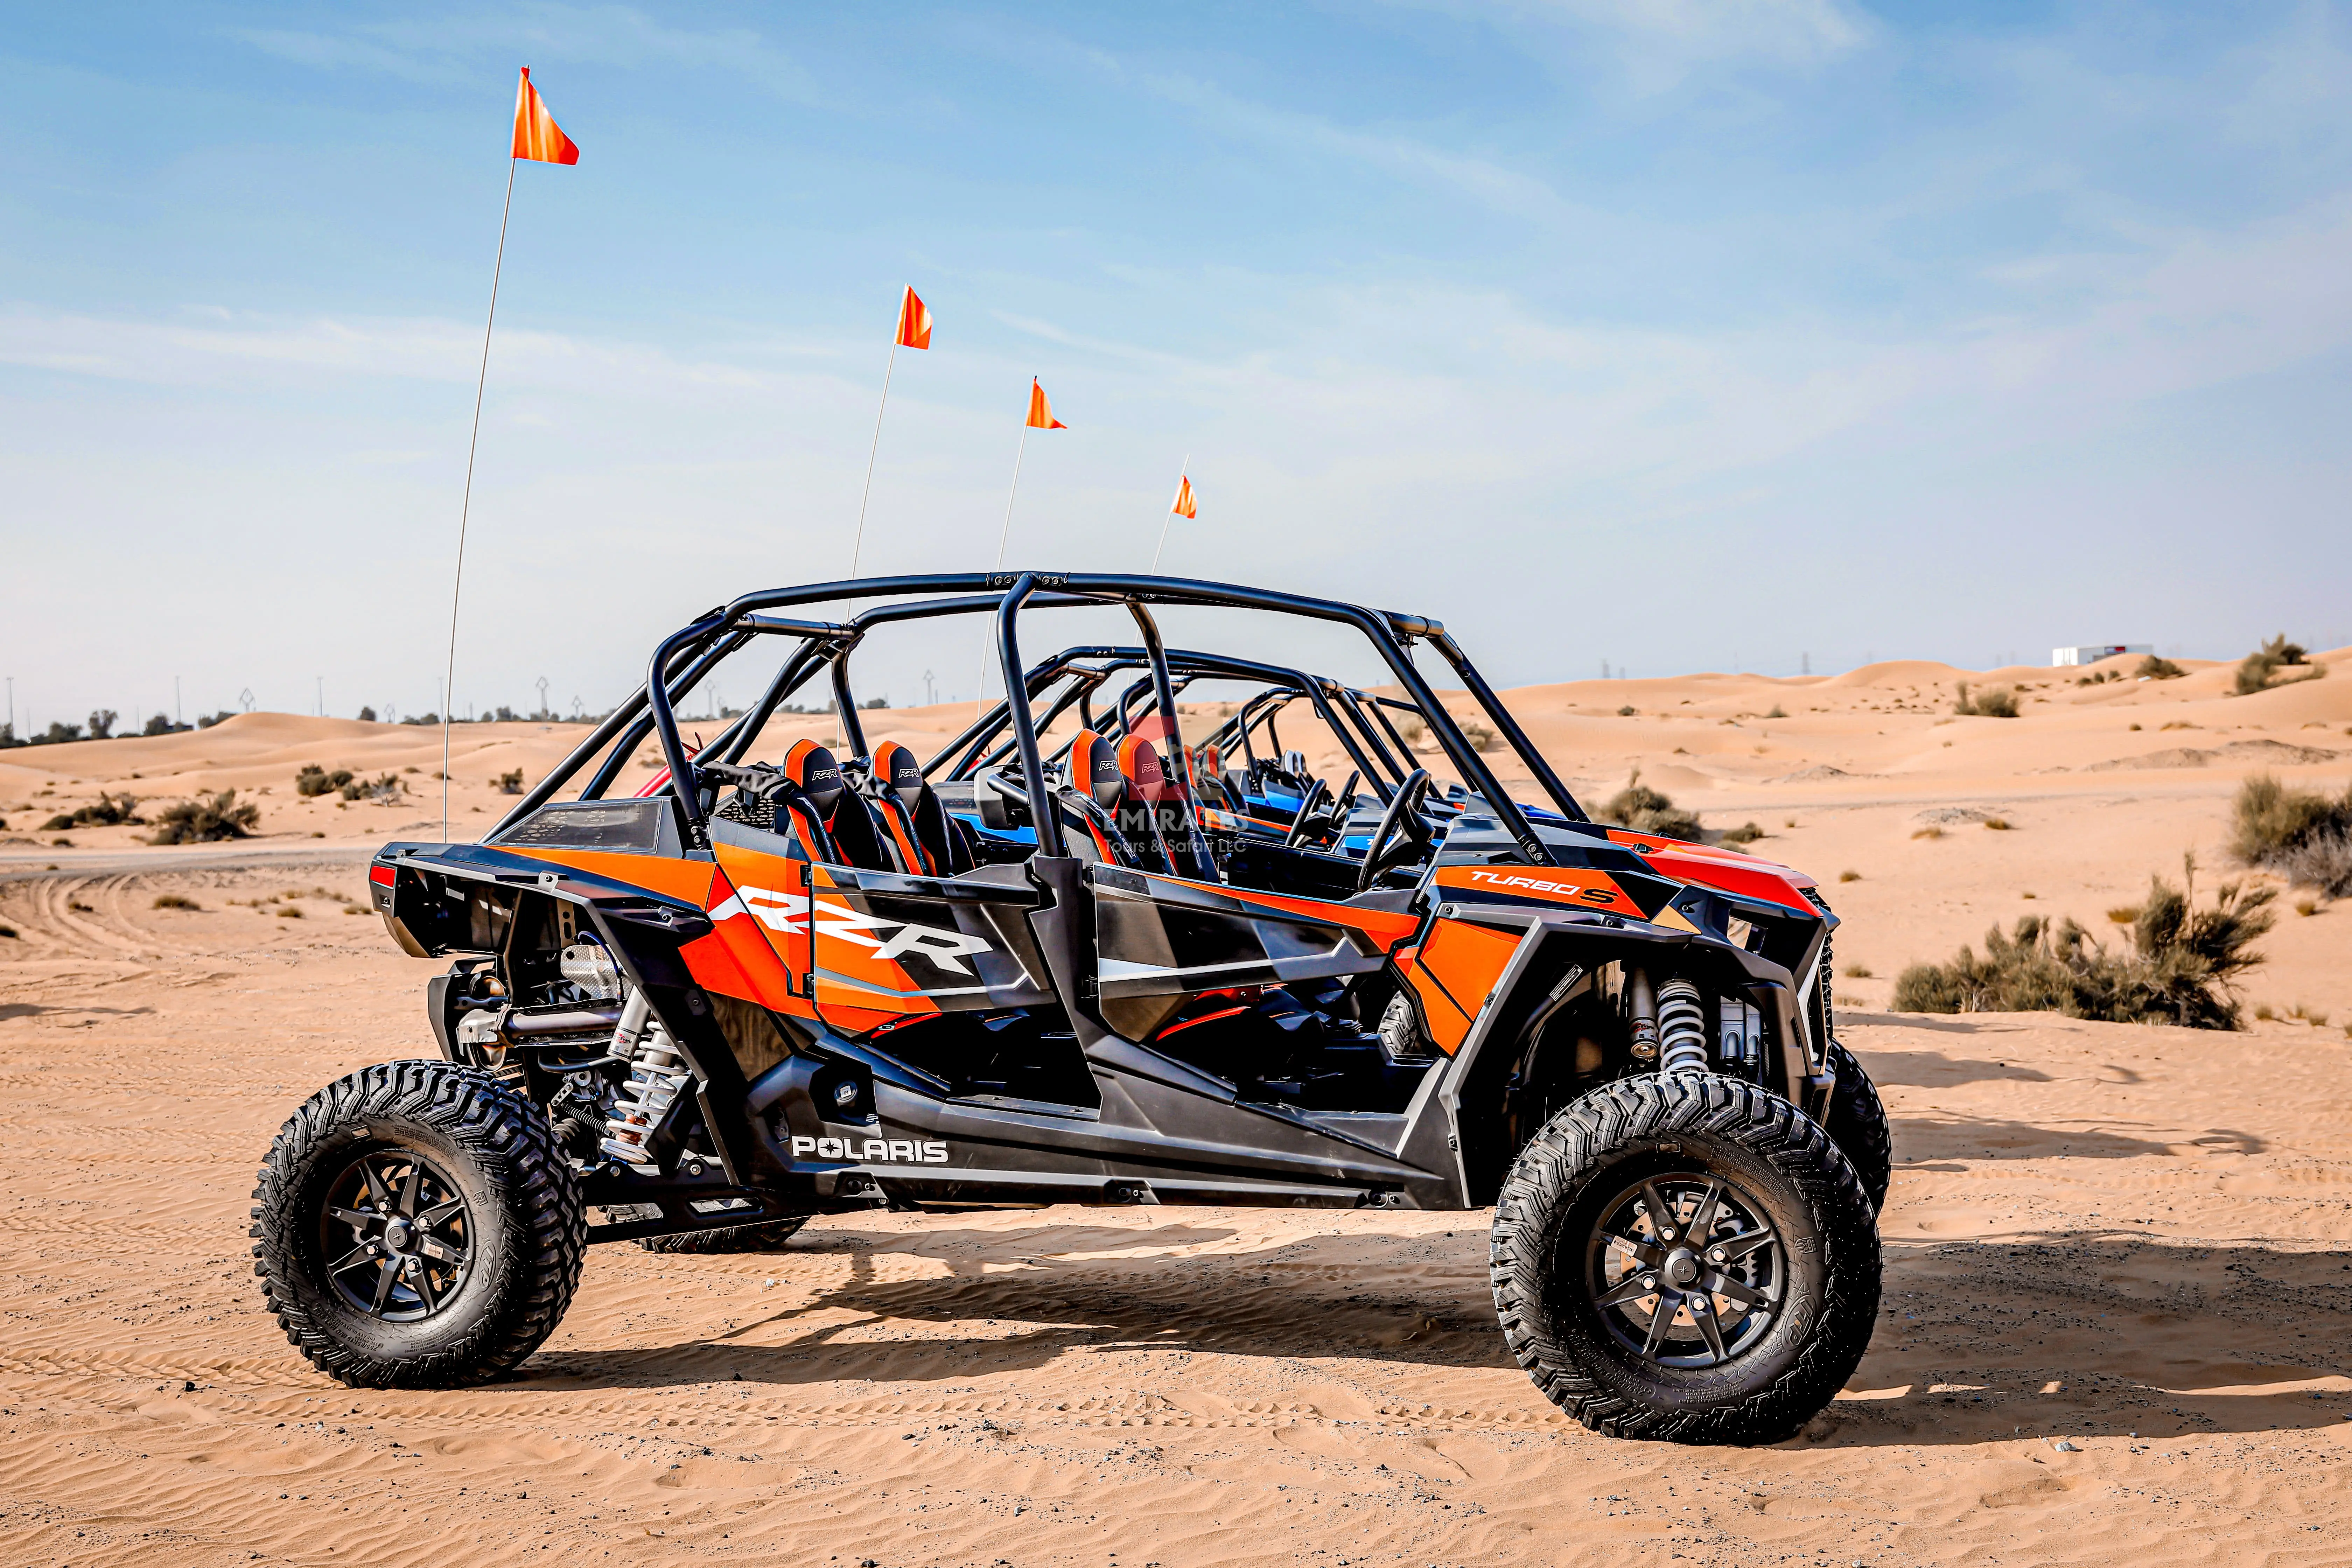 Dune Buggy Morning Tour: Four Seater-60 Minutes